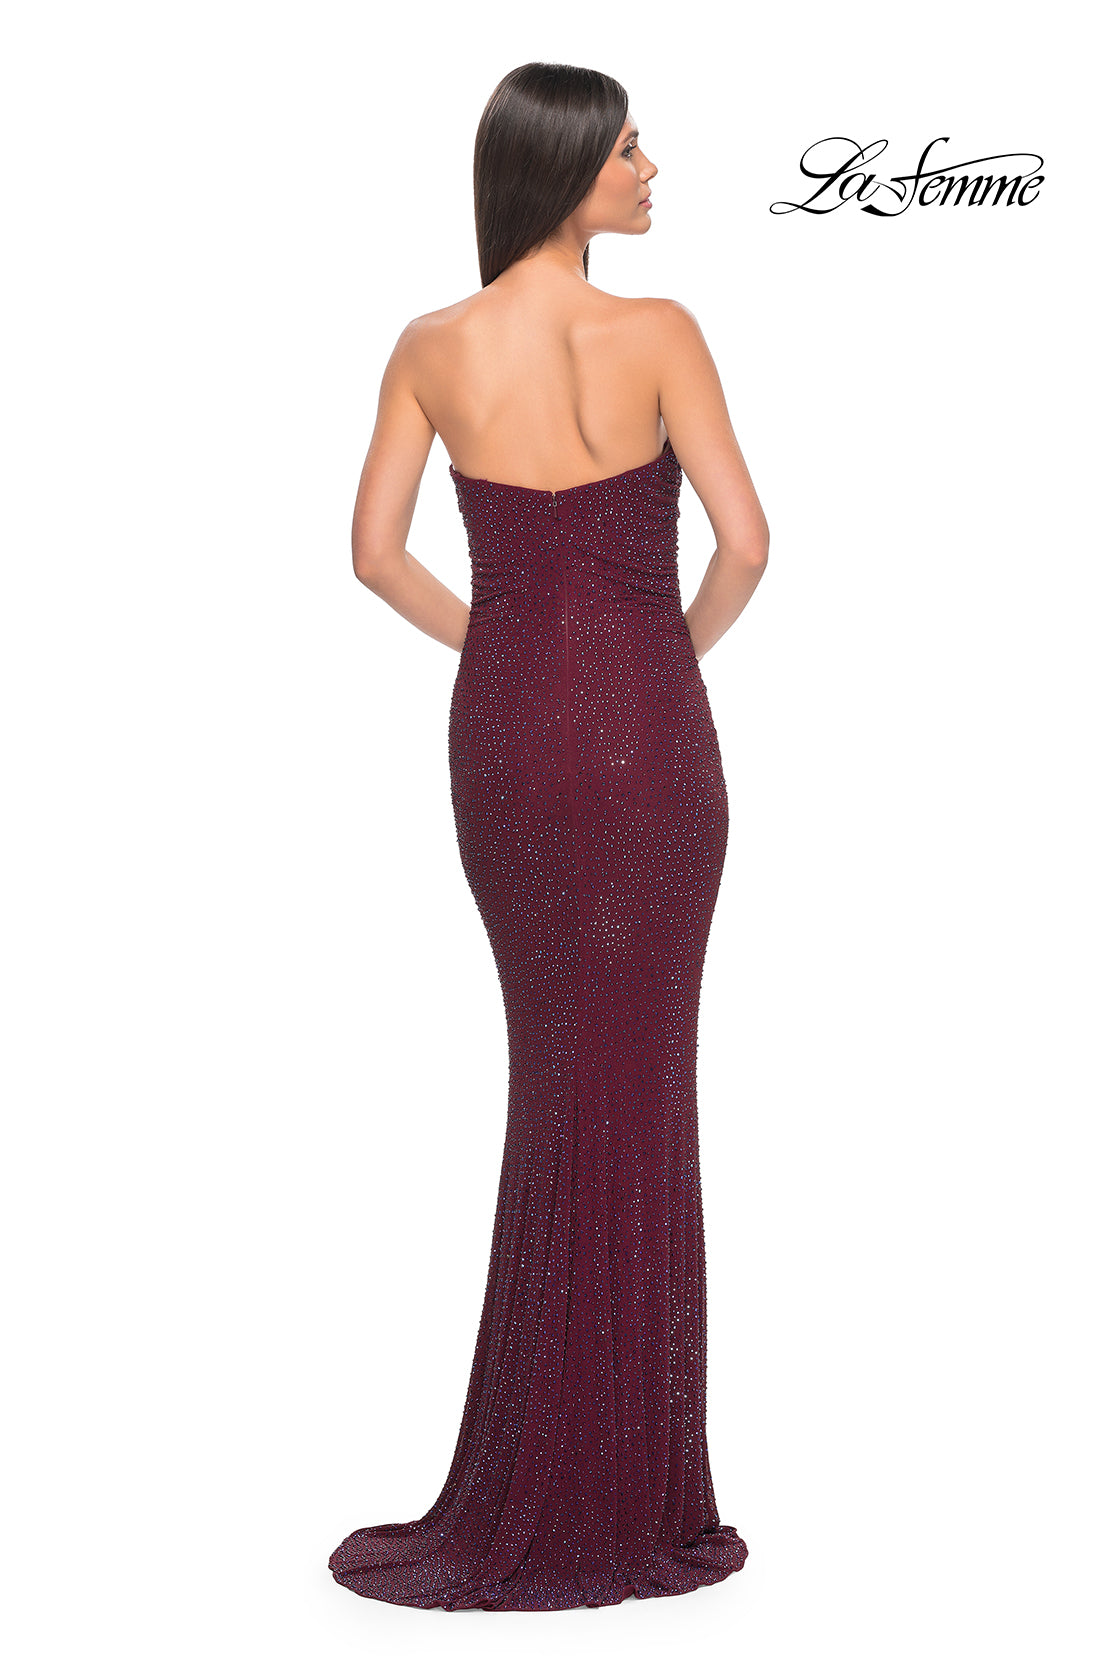 La-Femme-32141-Square-Neckline-Zipper-Back-Ruched-Hot-Stone-Jersey-Column-Fitted-Wine-Evening-Dress-B-Chic-Fashions-Prom-Dress